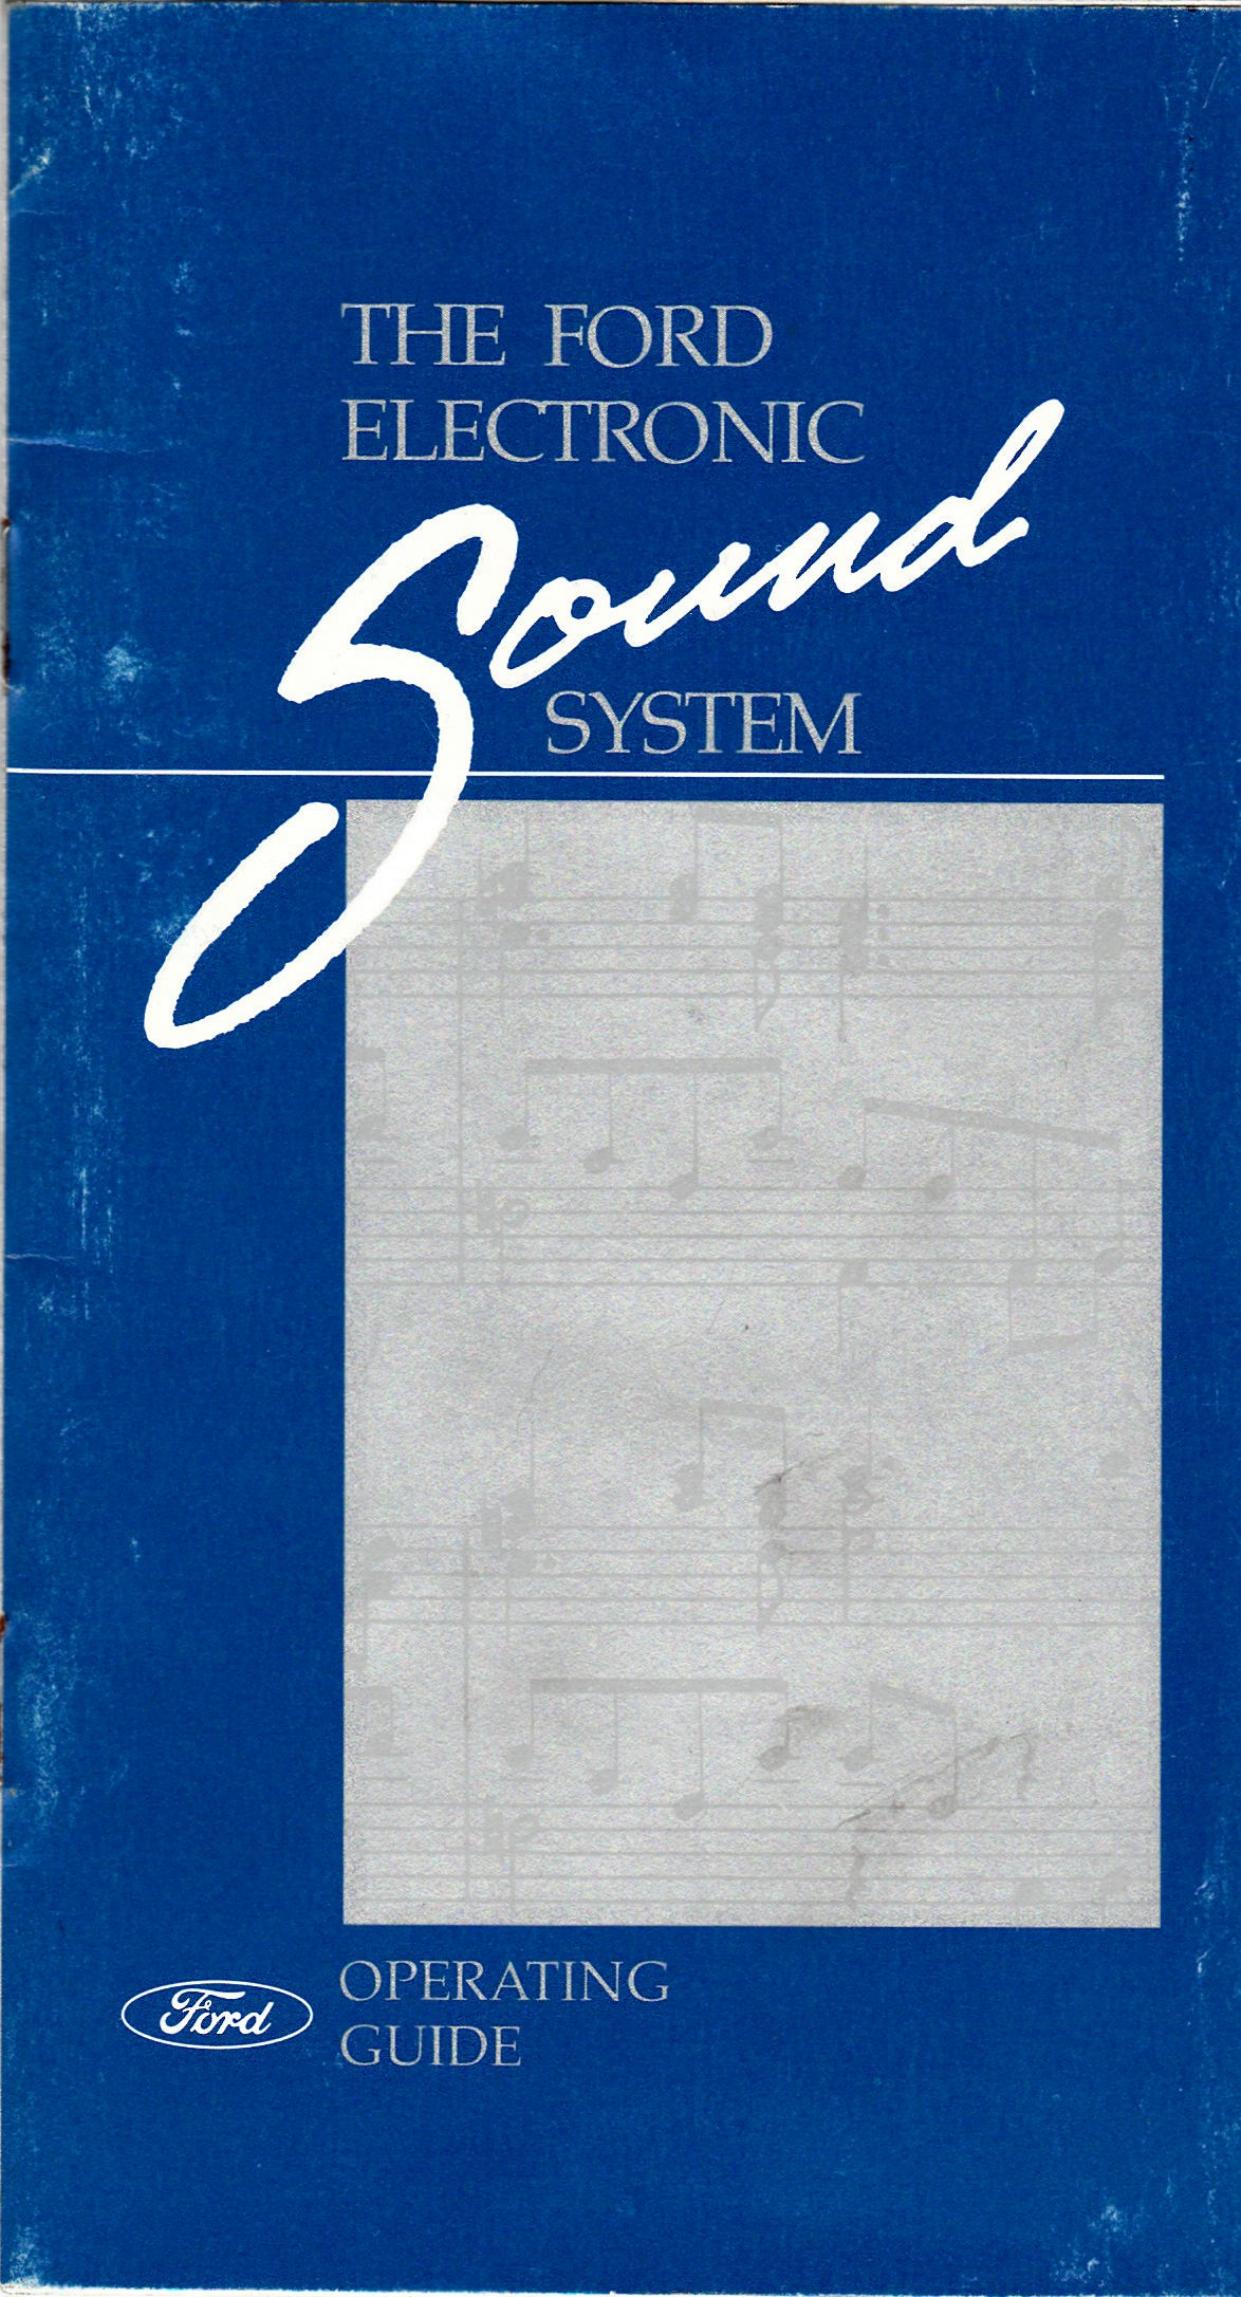 The Ford Electronic Sound System Operating Guide by Ford Motor Company